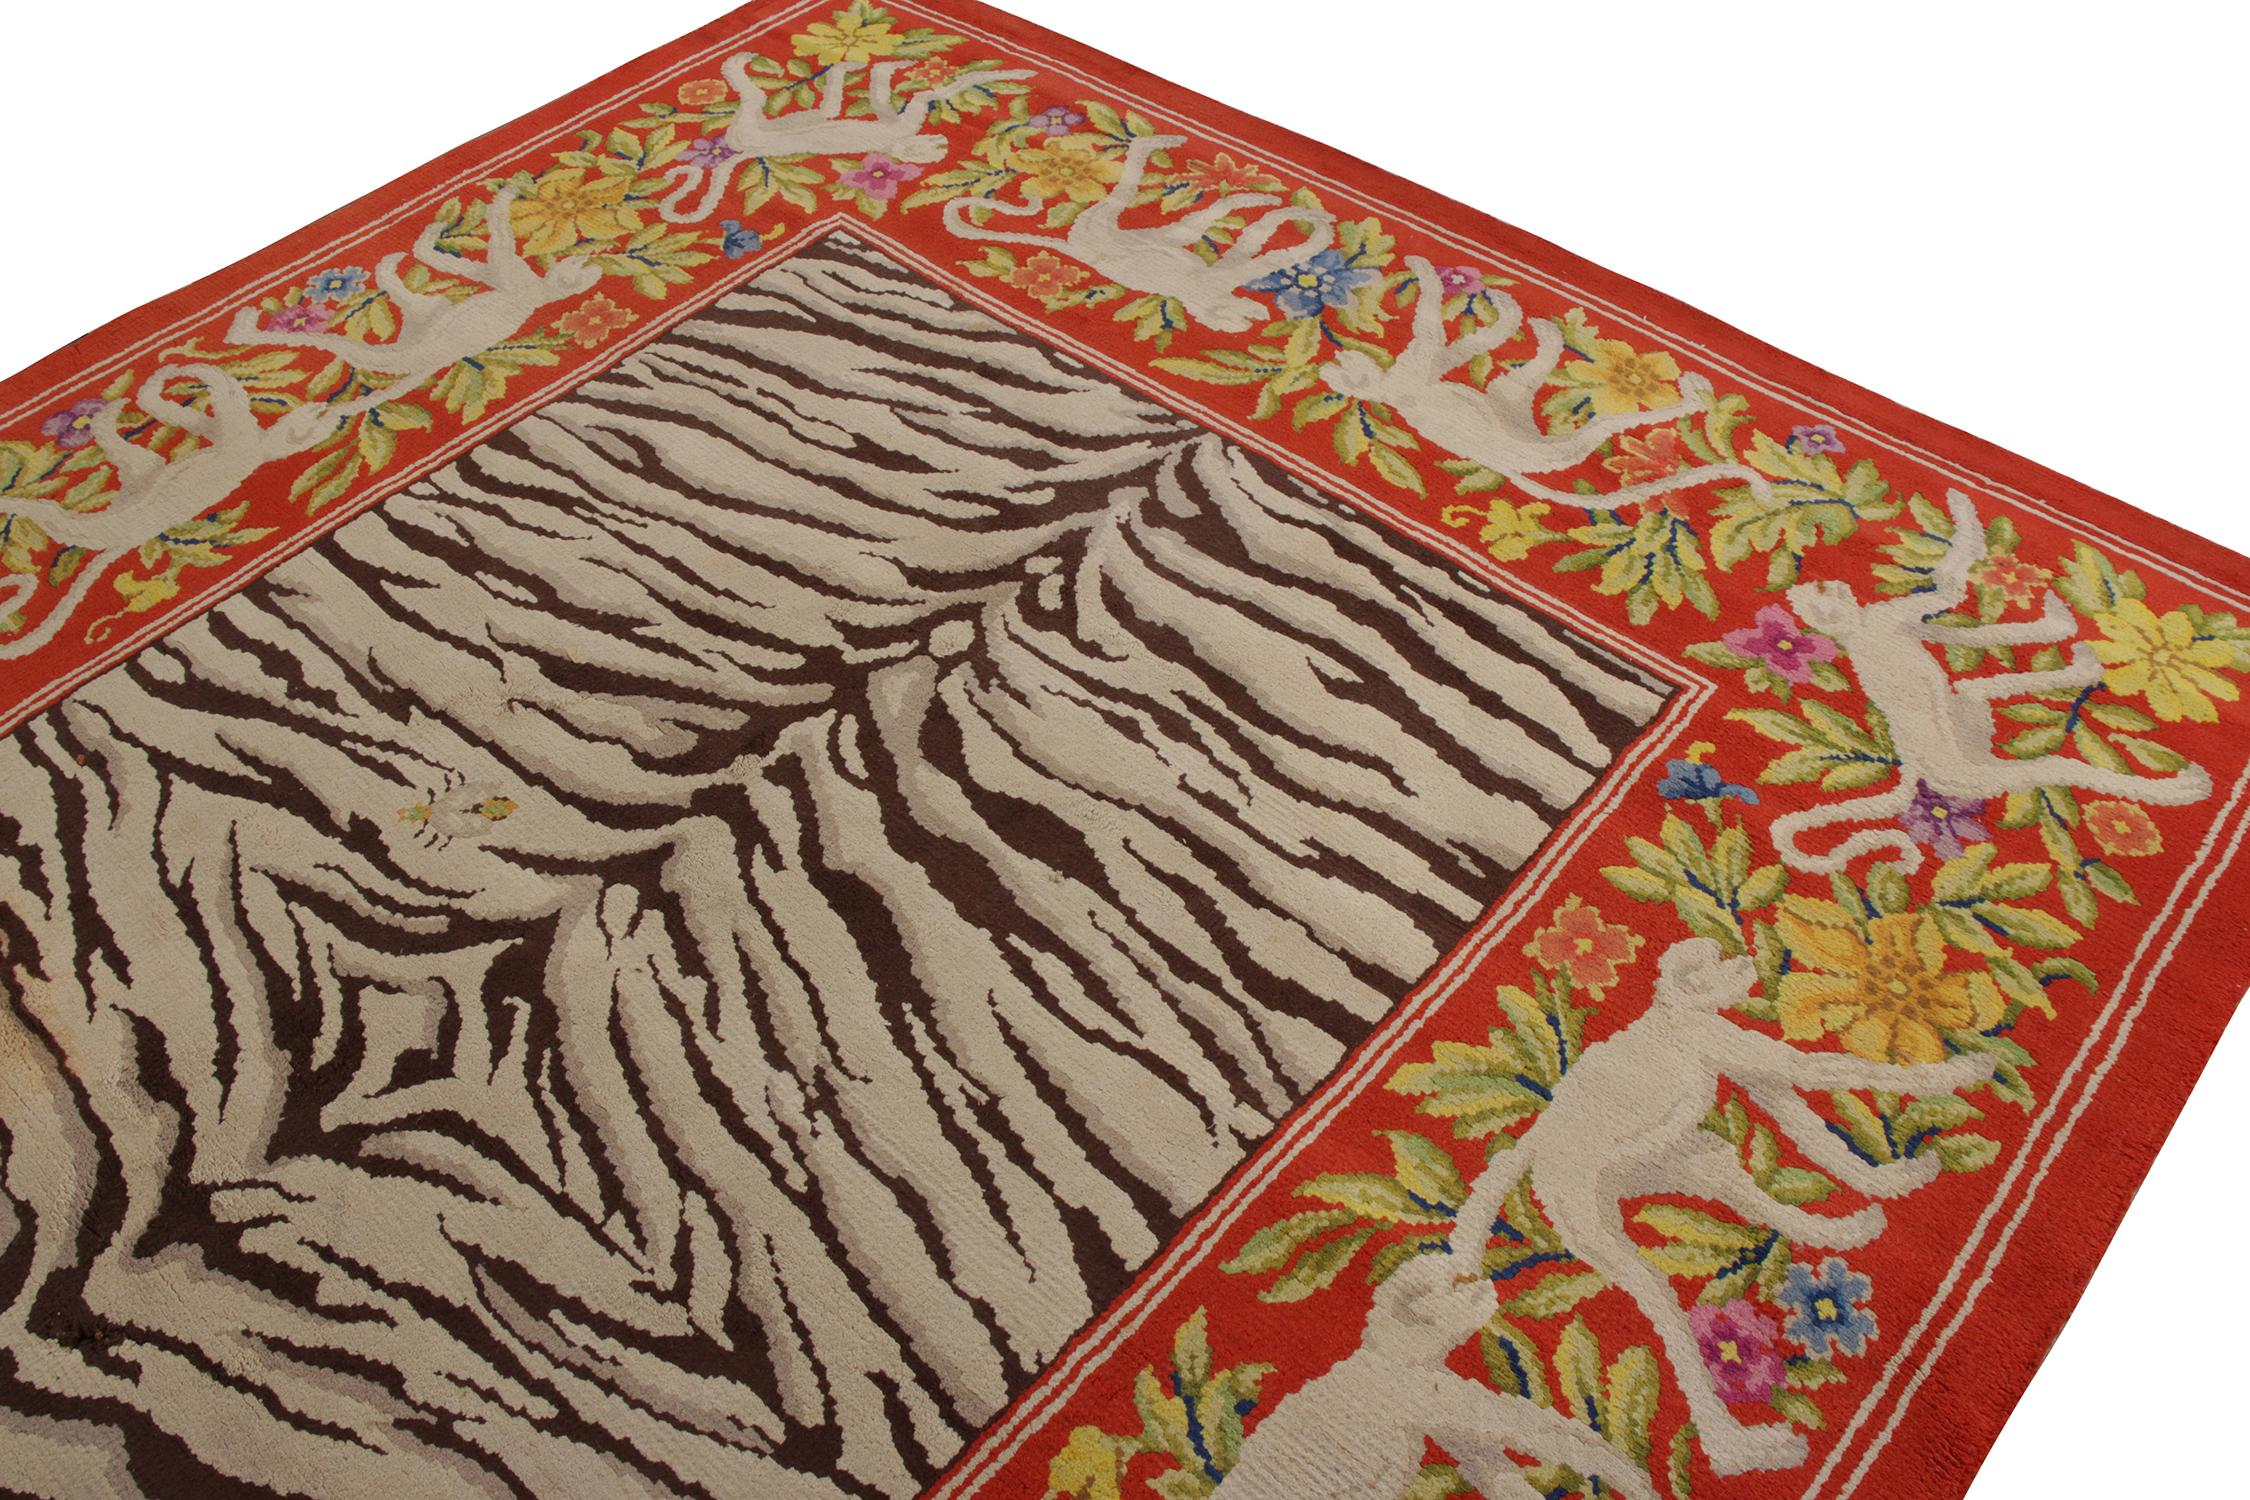 An 8x11 vintage rug in a rare mid-century pictorial design, hand-knotted in wool originating from Spain circa 1950-1960. Playing beige-brown Zebra-like stripes atop rich red in the most unique border, depicting finely detailed monkeys among graceful